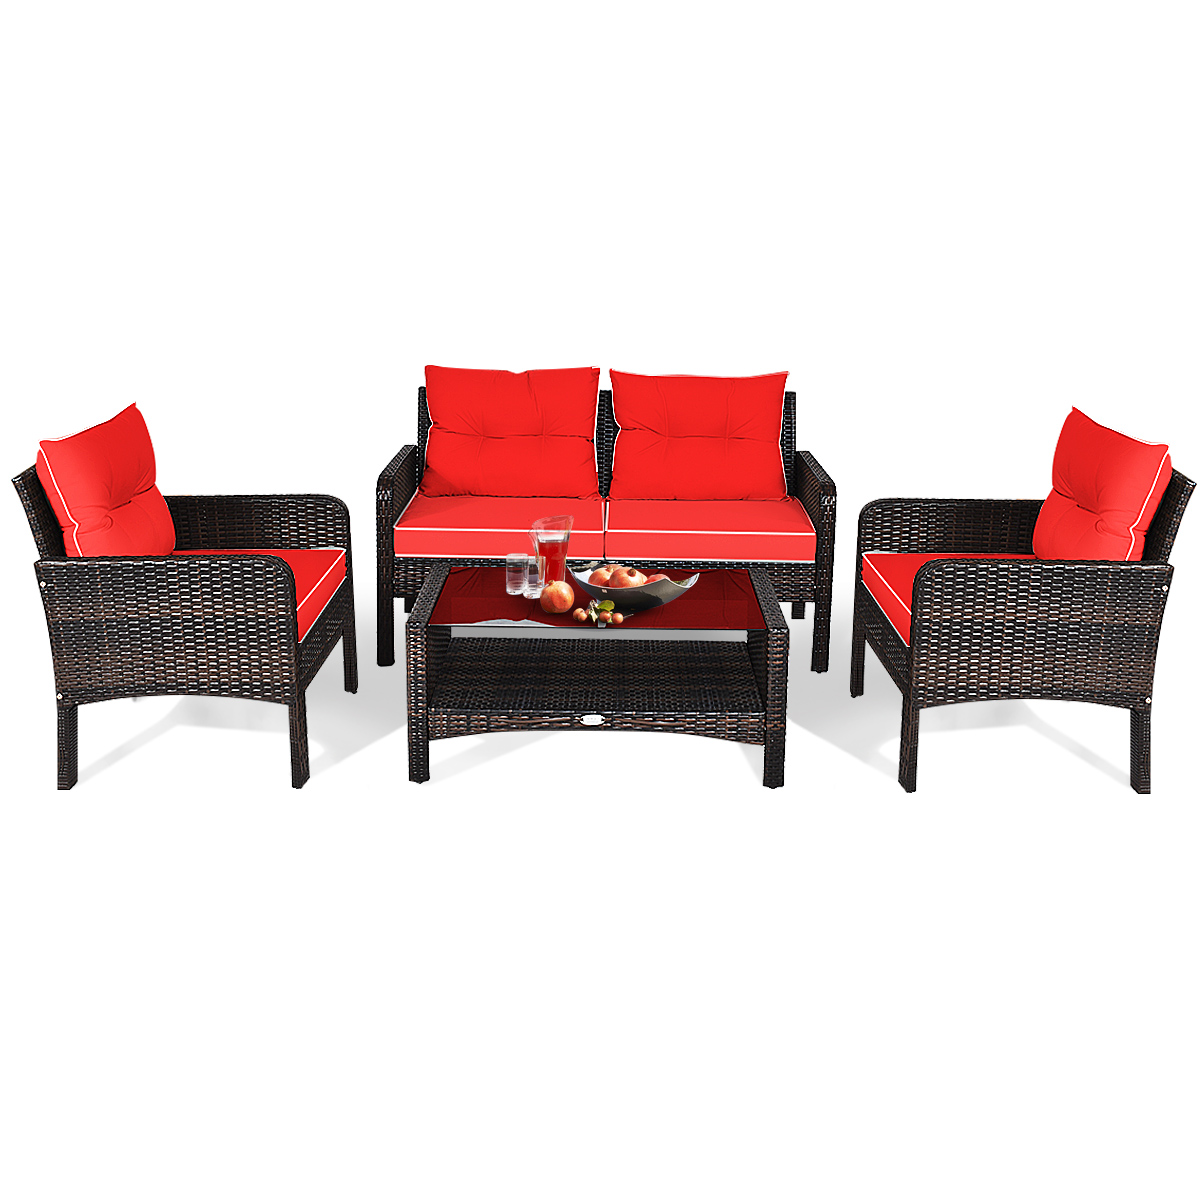 Gymax 4PCS Rattan Patio Conversation Set Red Cushioned Outdoor Furniture Set - image 3 of 9